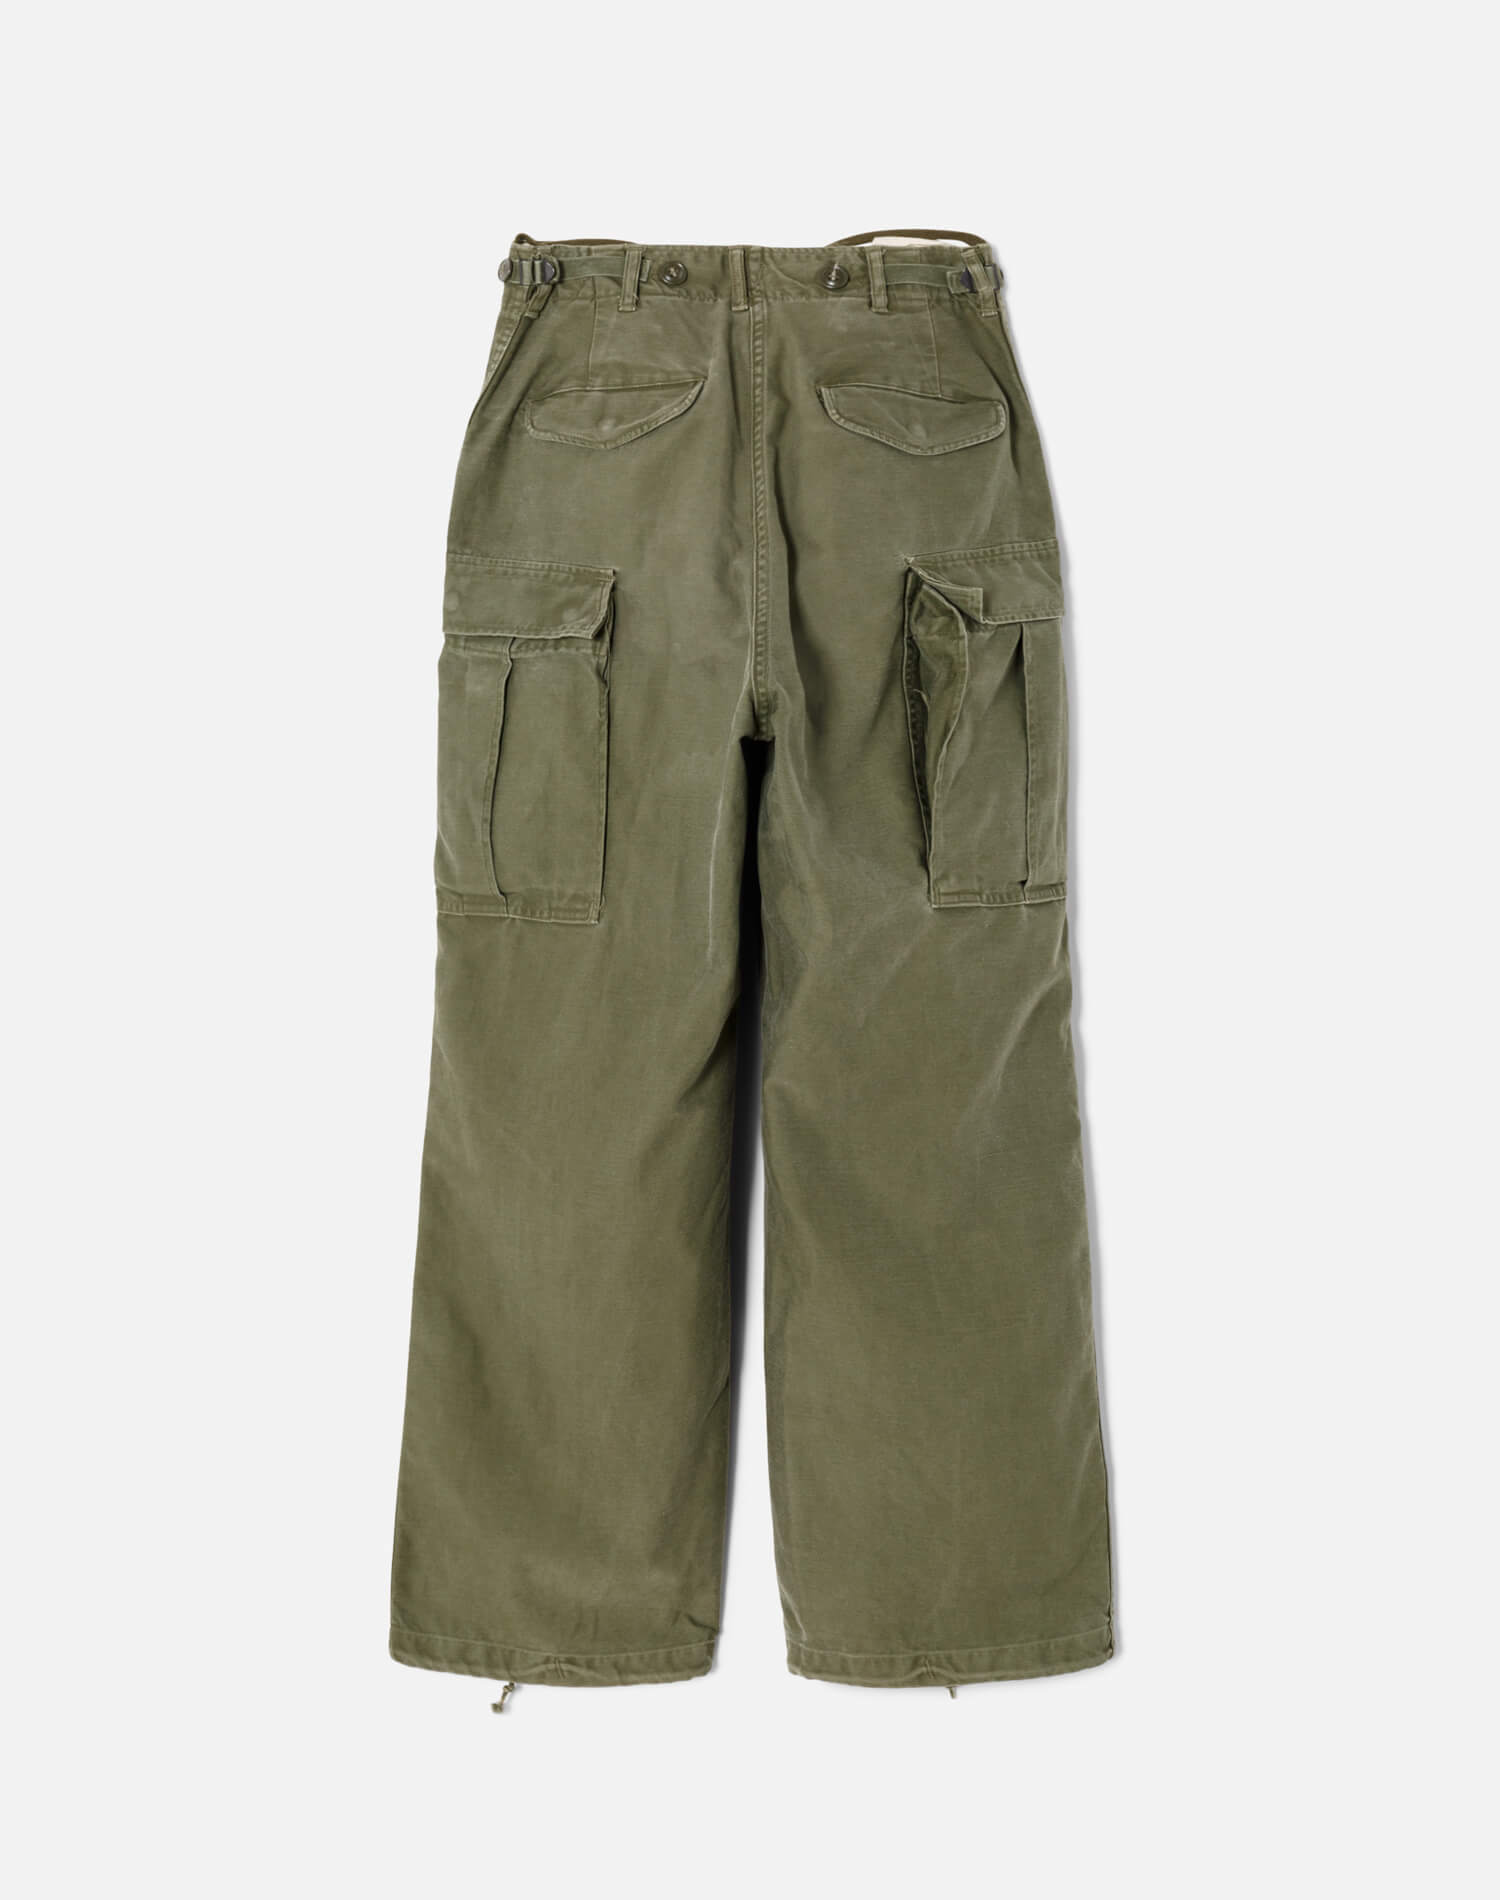 70s Military Cargo Pant